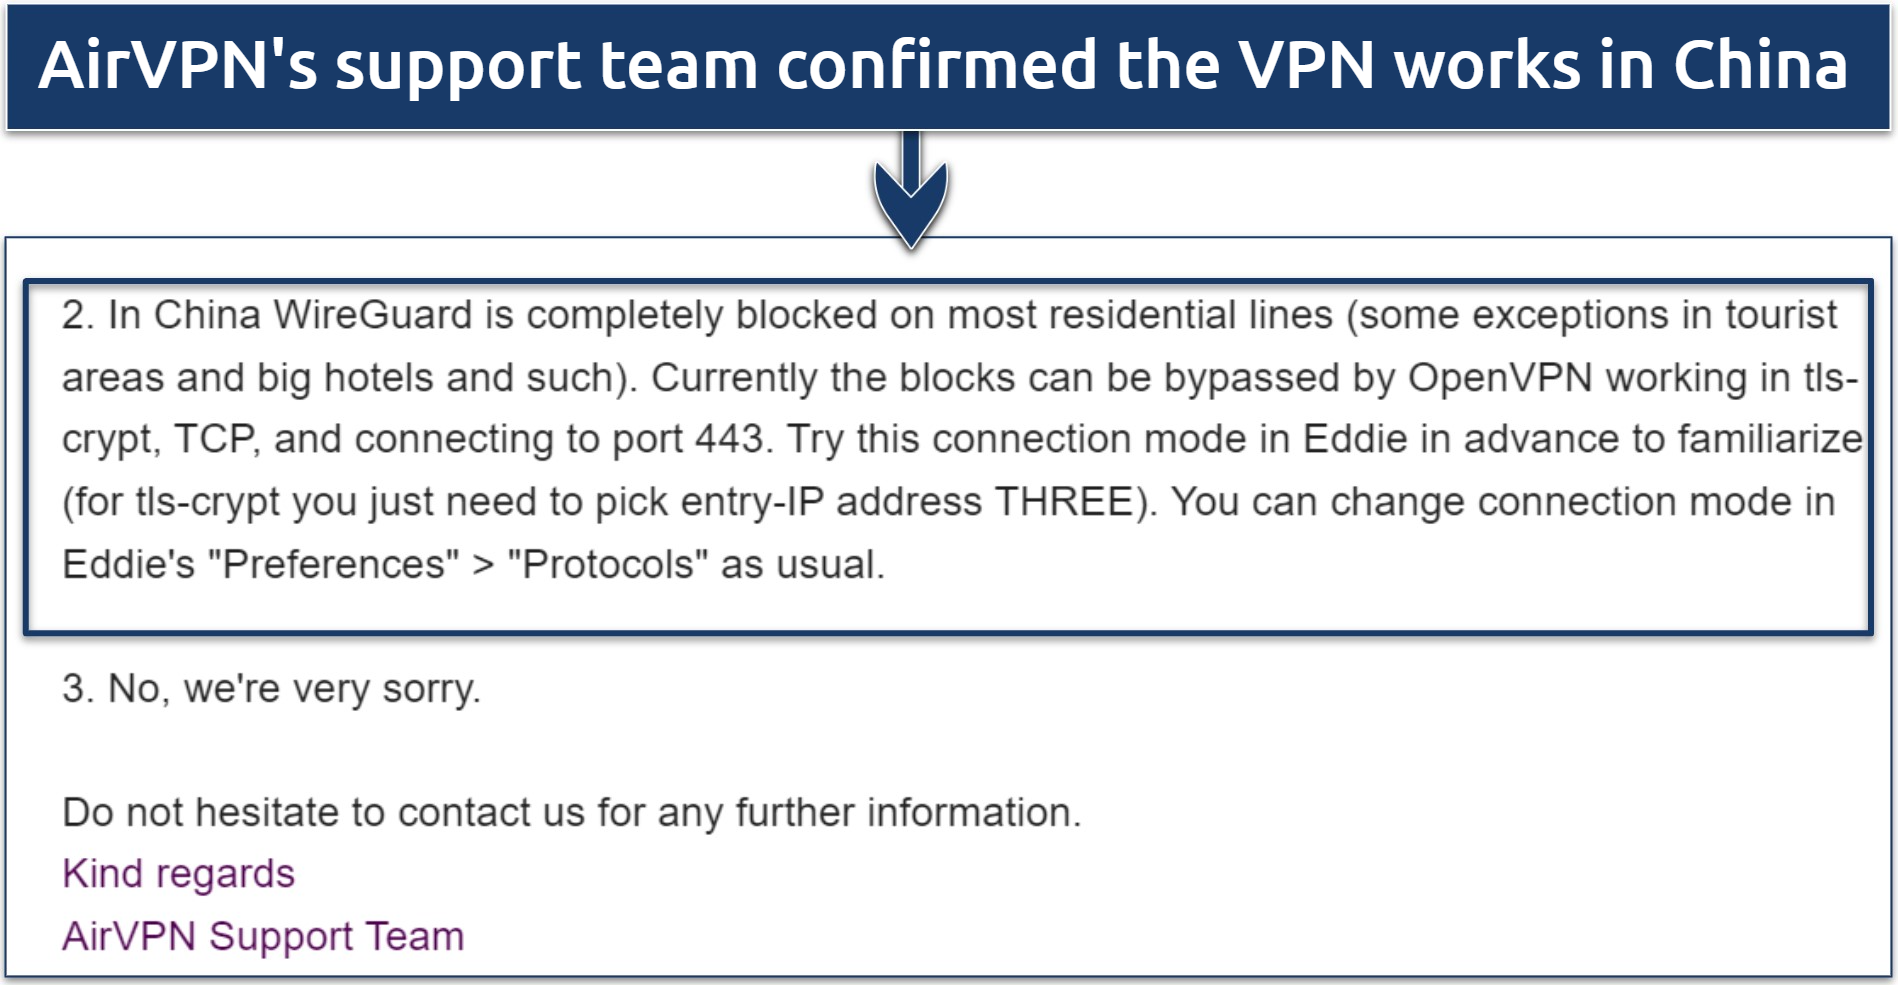 A screenshot showing AirVPN's support team confirmed the VPN works in China